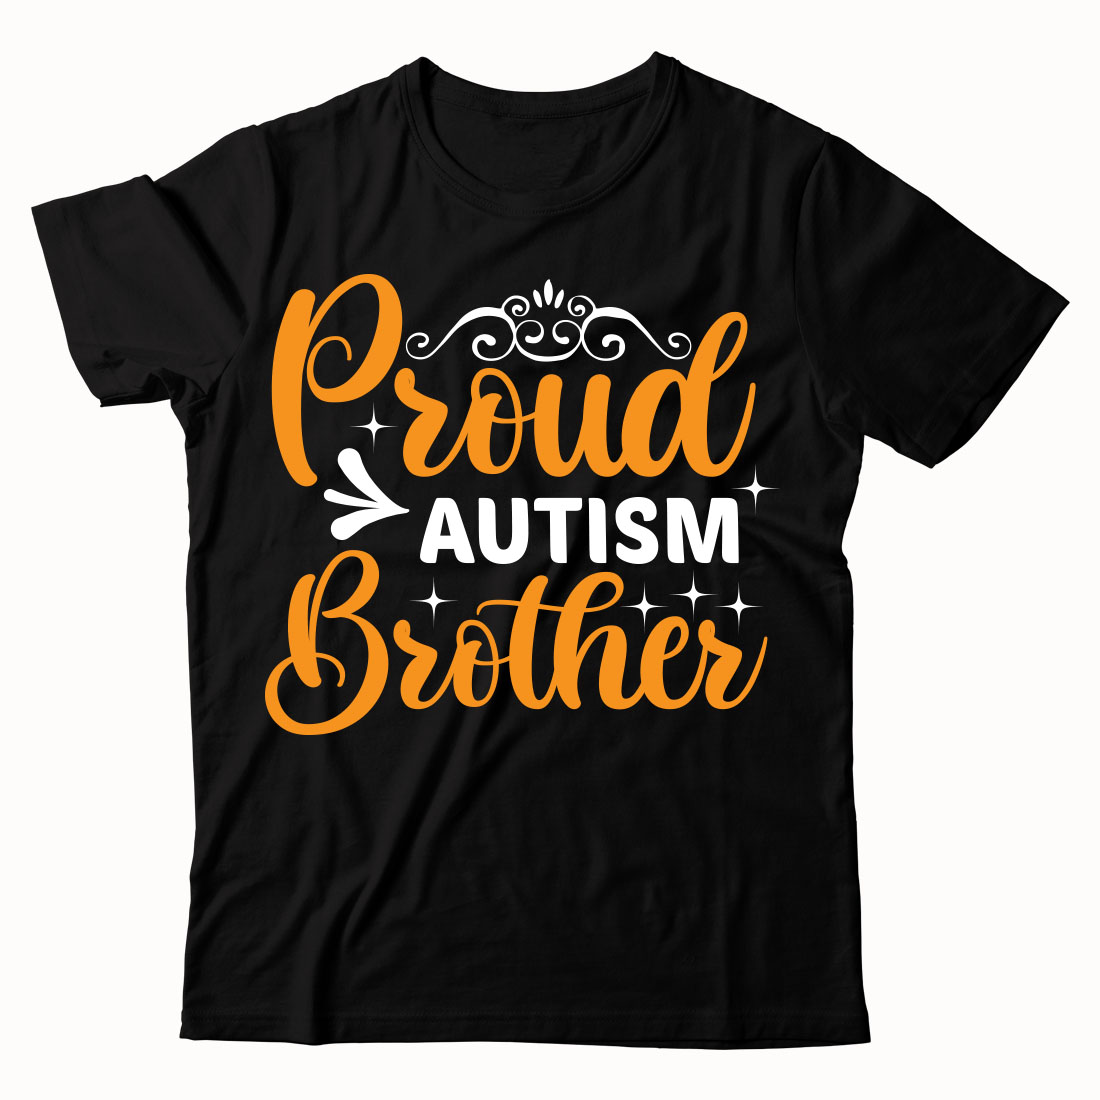 Black shirt that says proud autism brother.